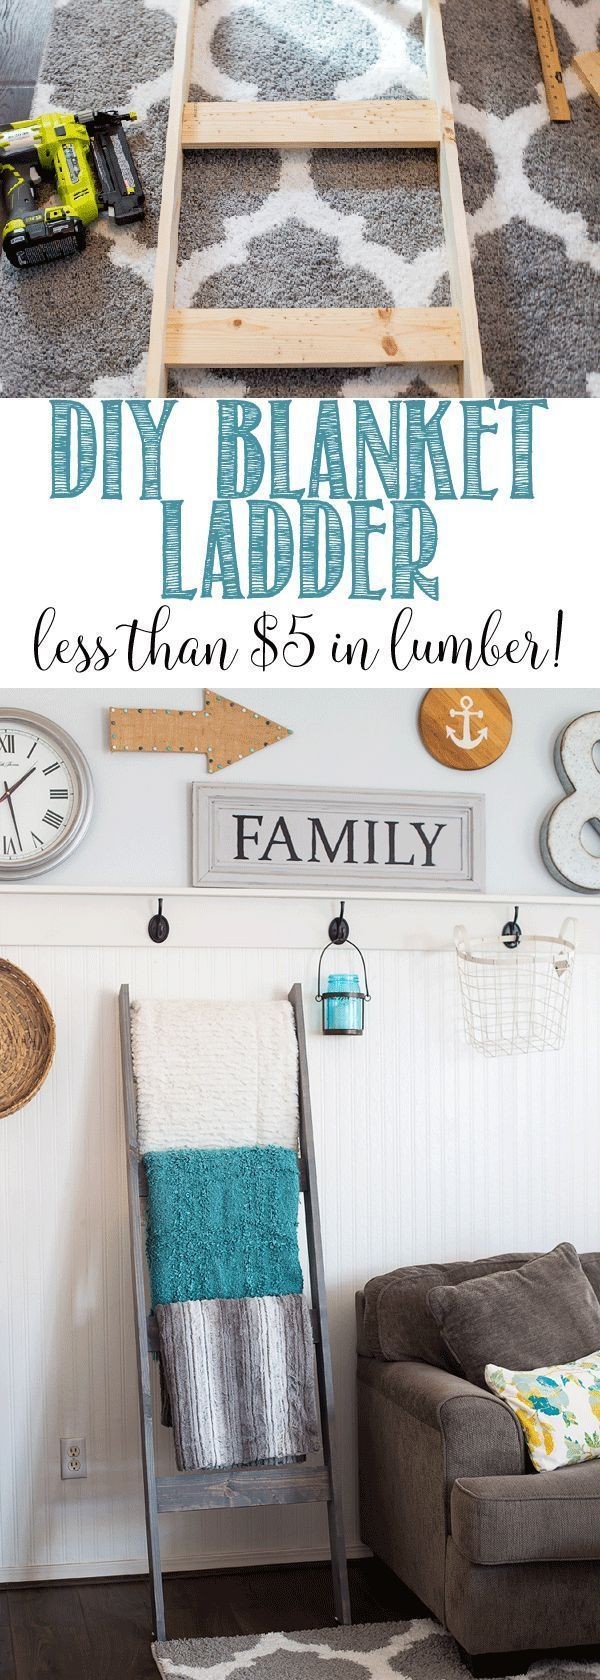 DIY Blanket Ladder for less than $5 in lumber Great step by